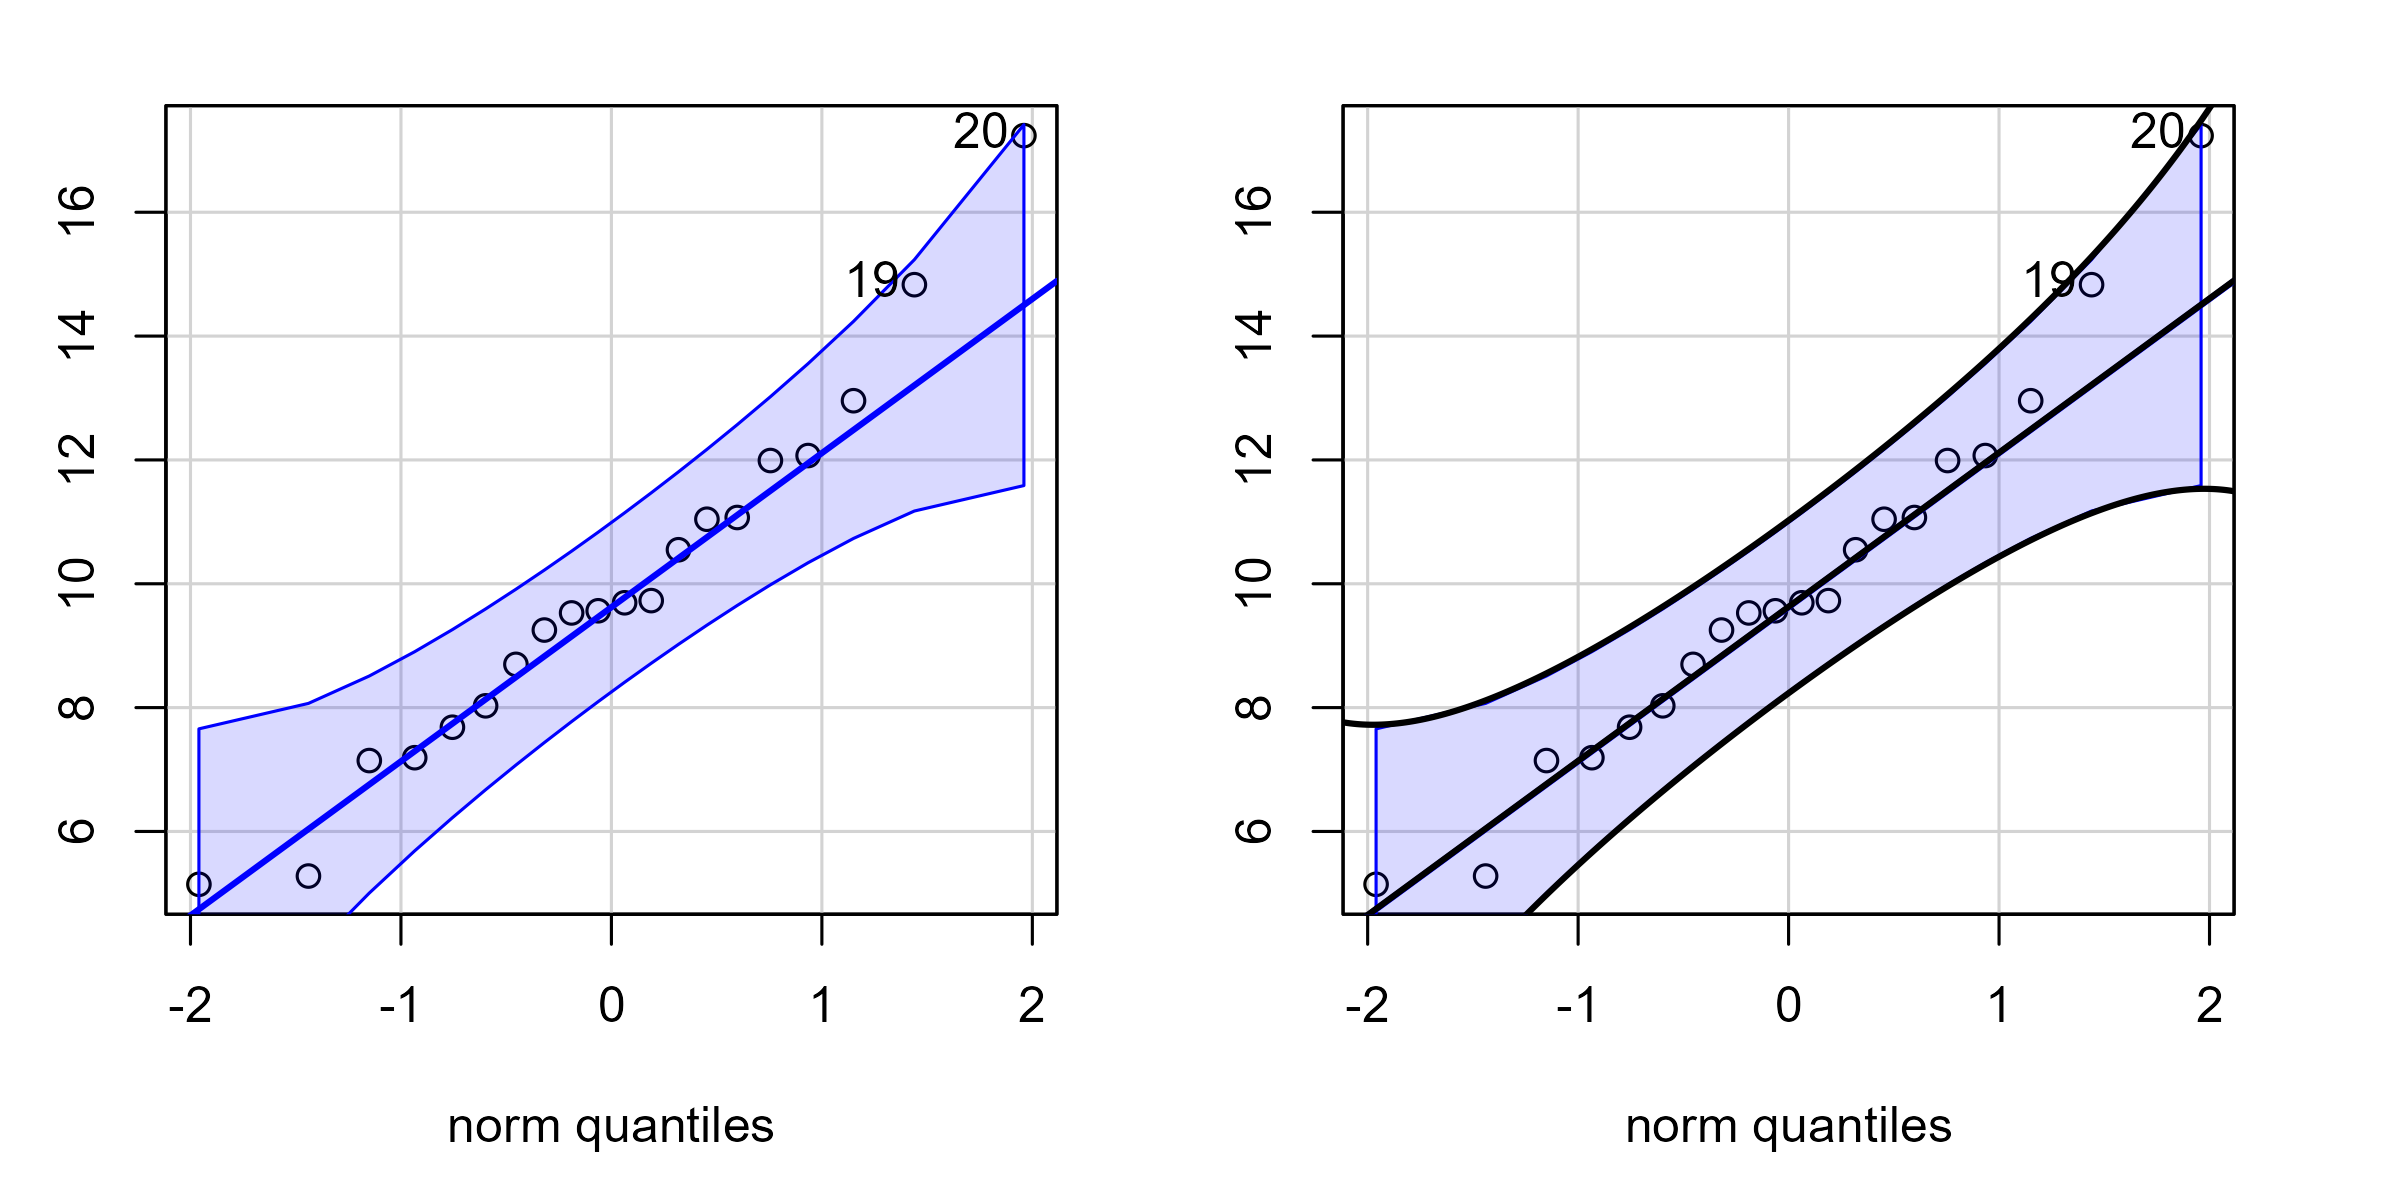 Two Q-Q plots side by side. First one shows the default from the car package. The second one is the same but draws black lines over the original blue lines to confirm that our calculations worked.